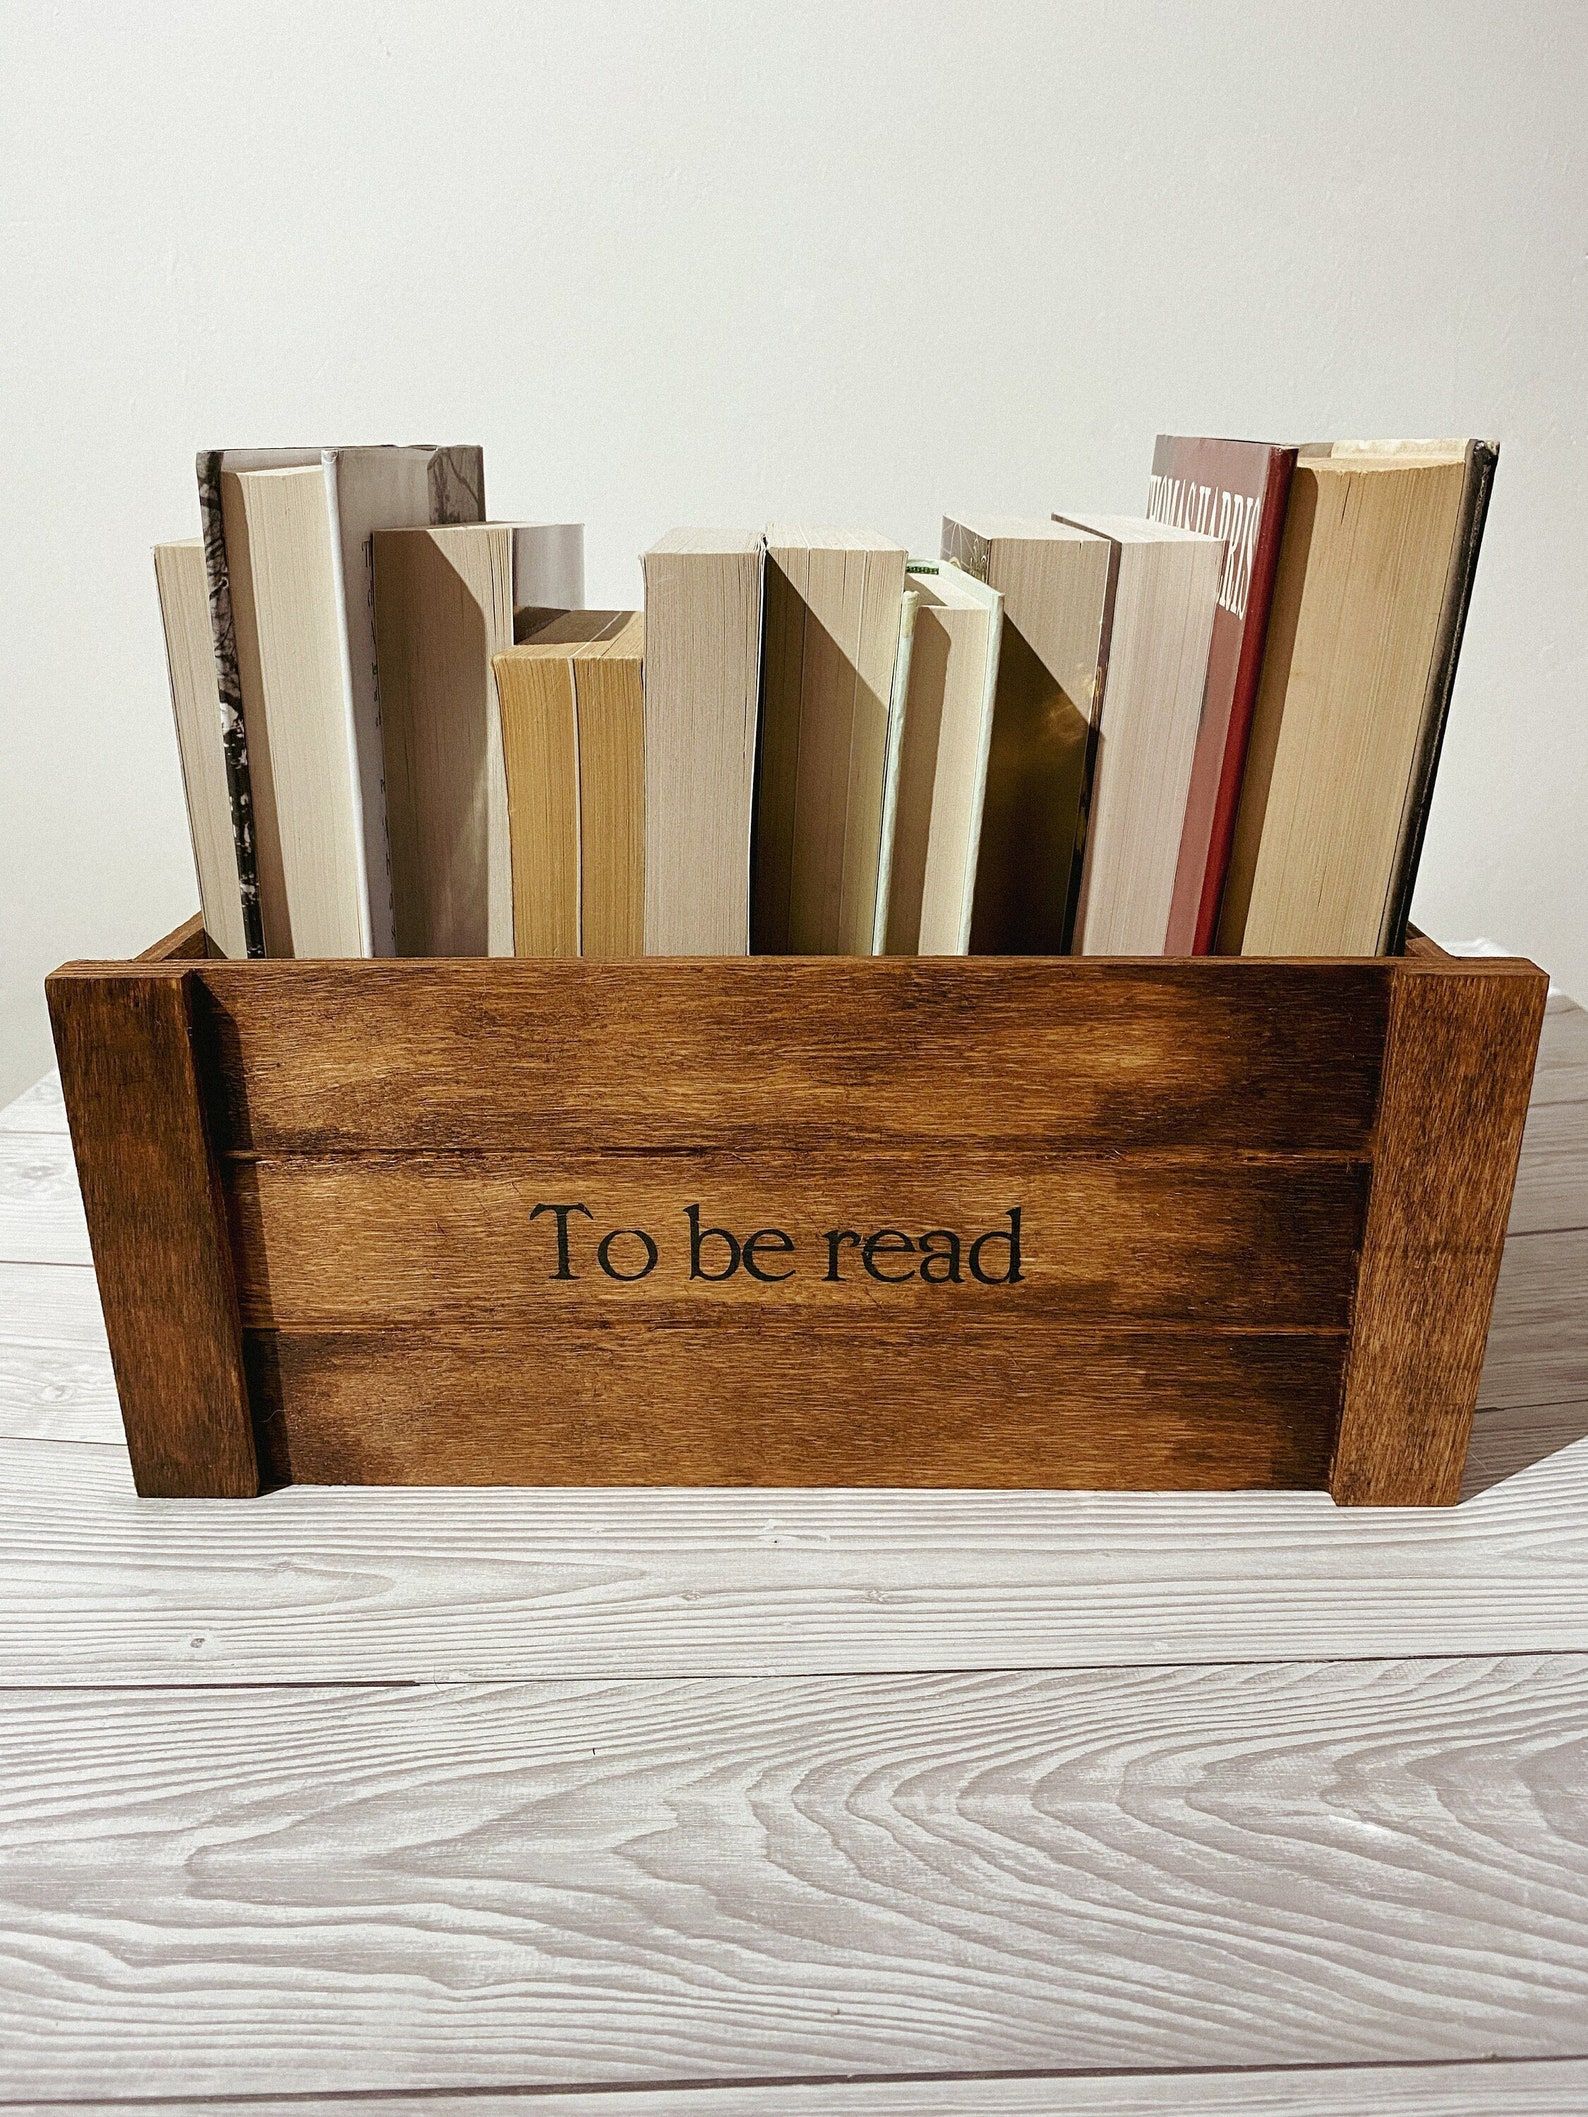 wooden crate holding books that says to be read on the front 